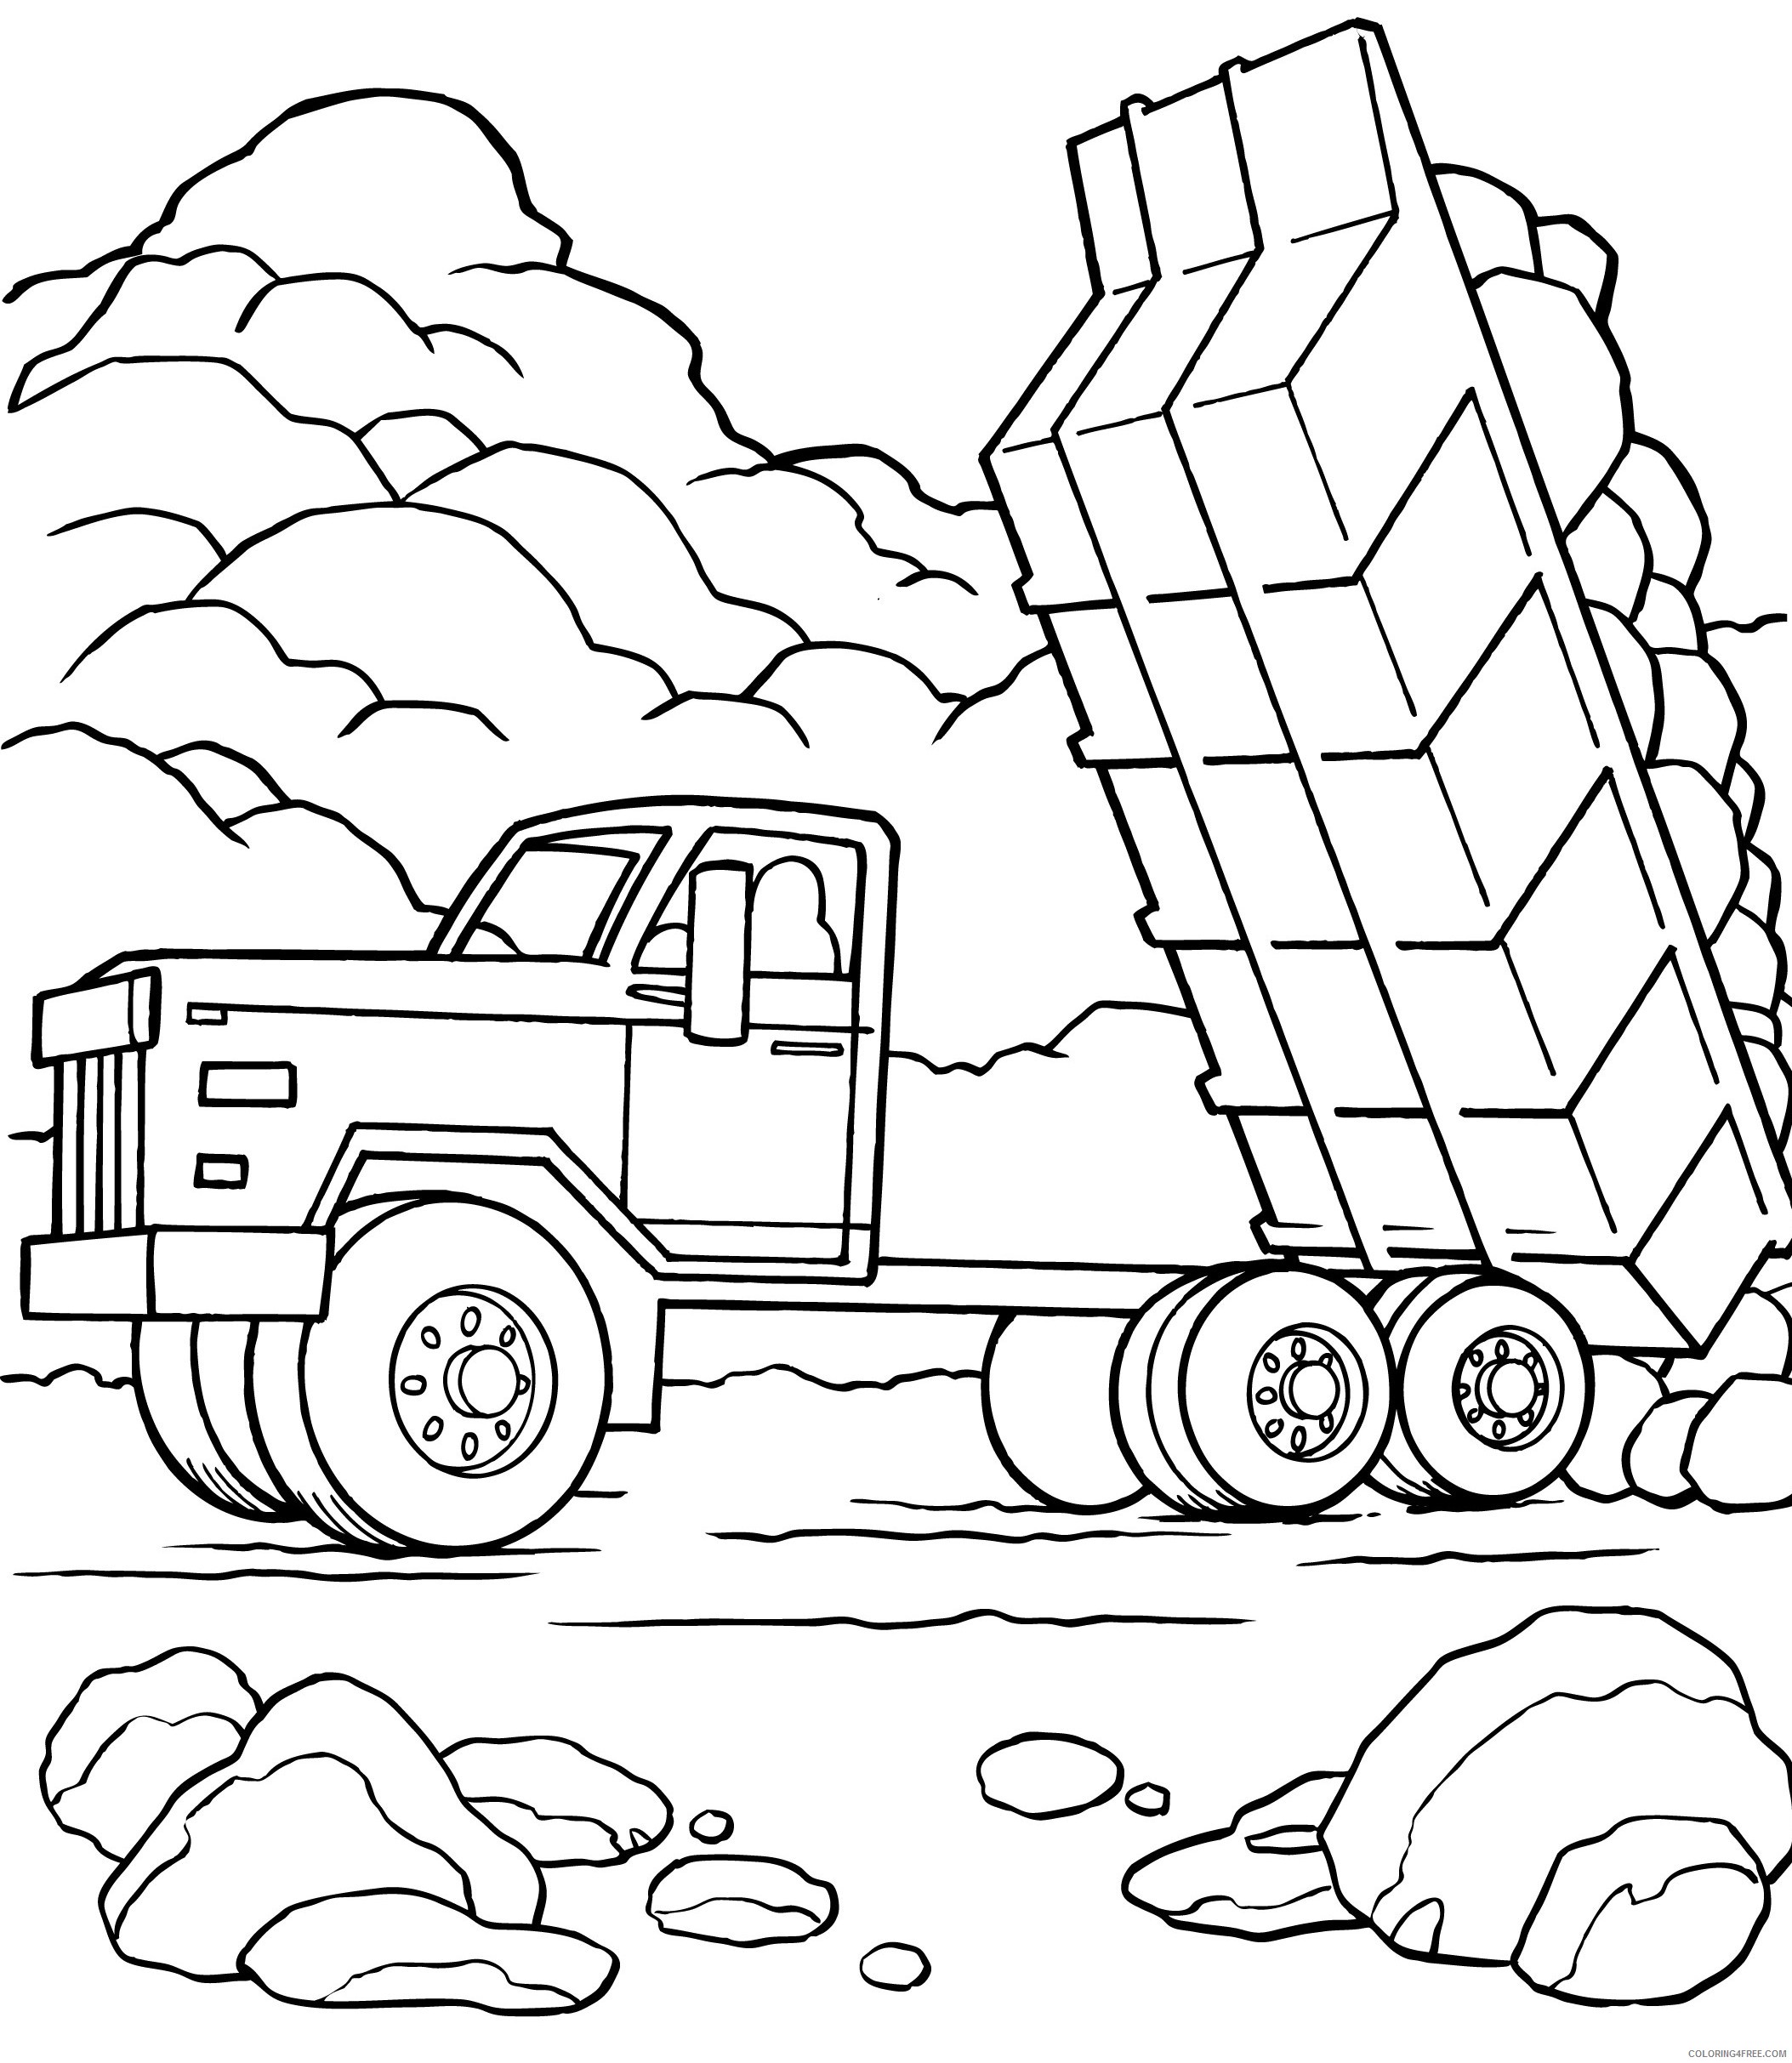 Coloring pages truck coloring pages dump truck printable